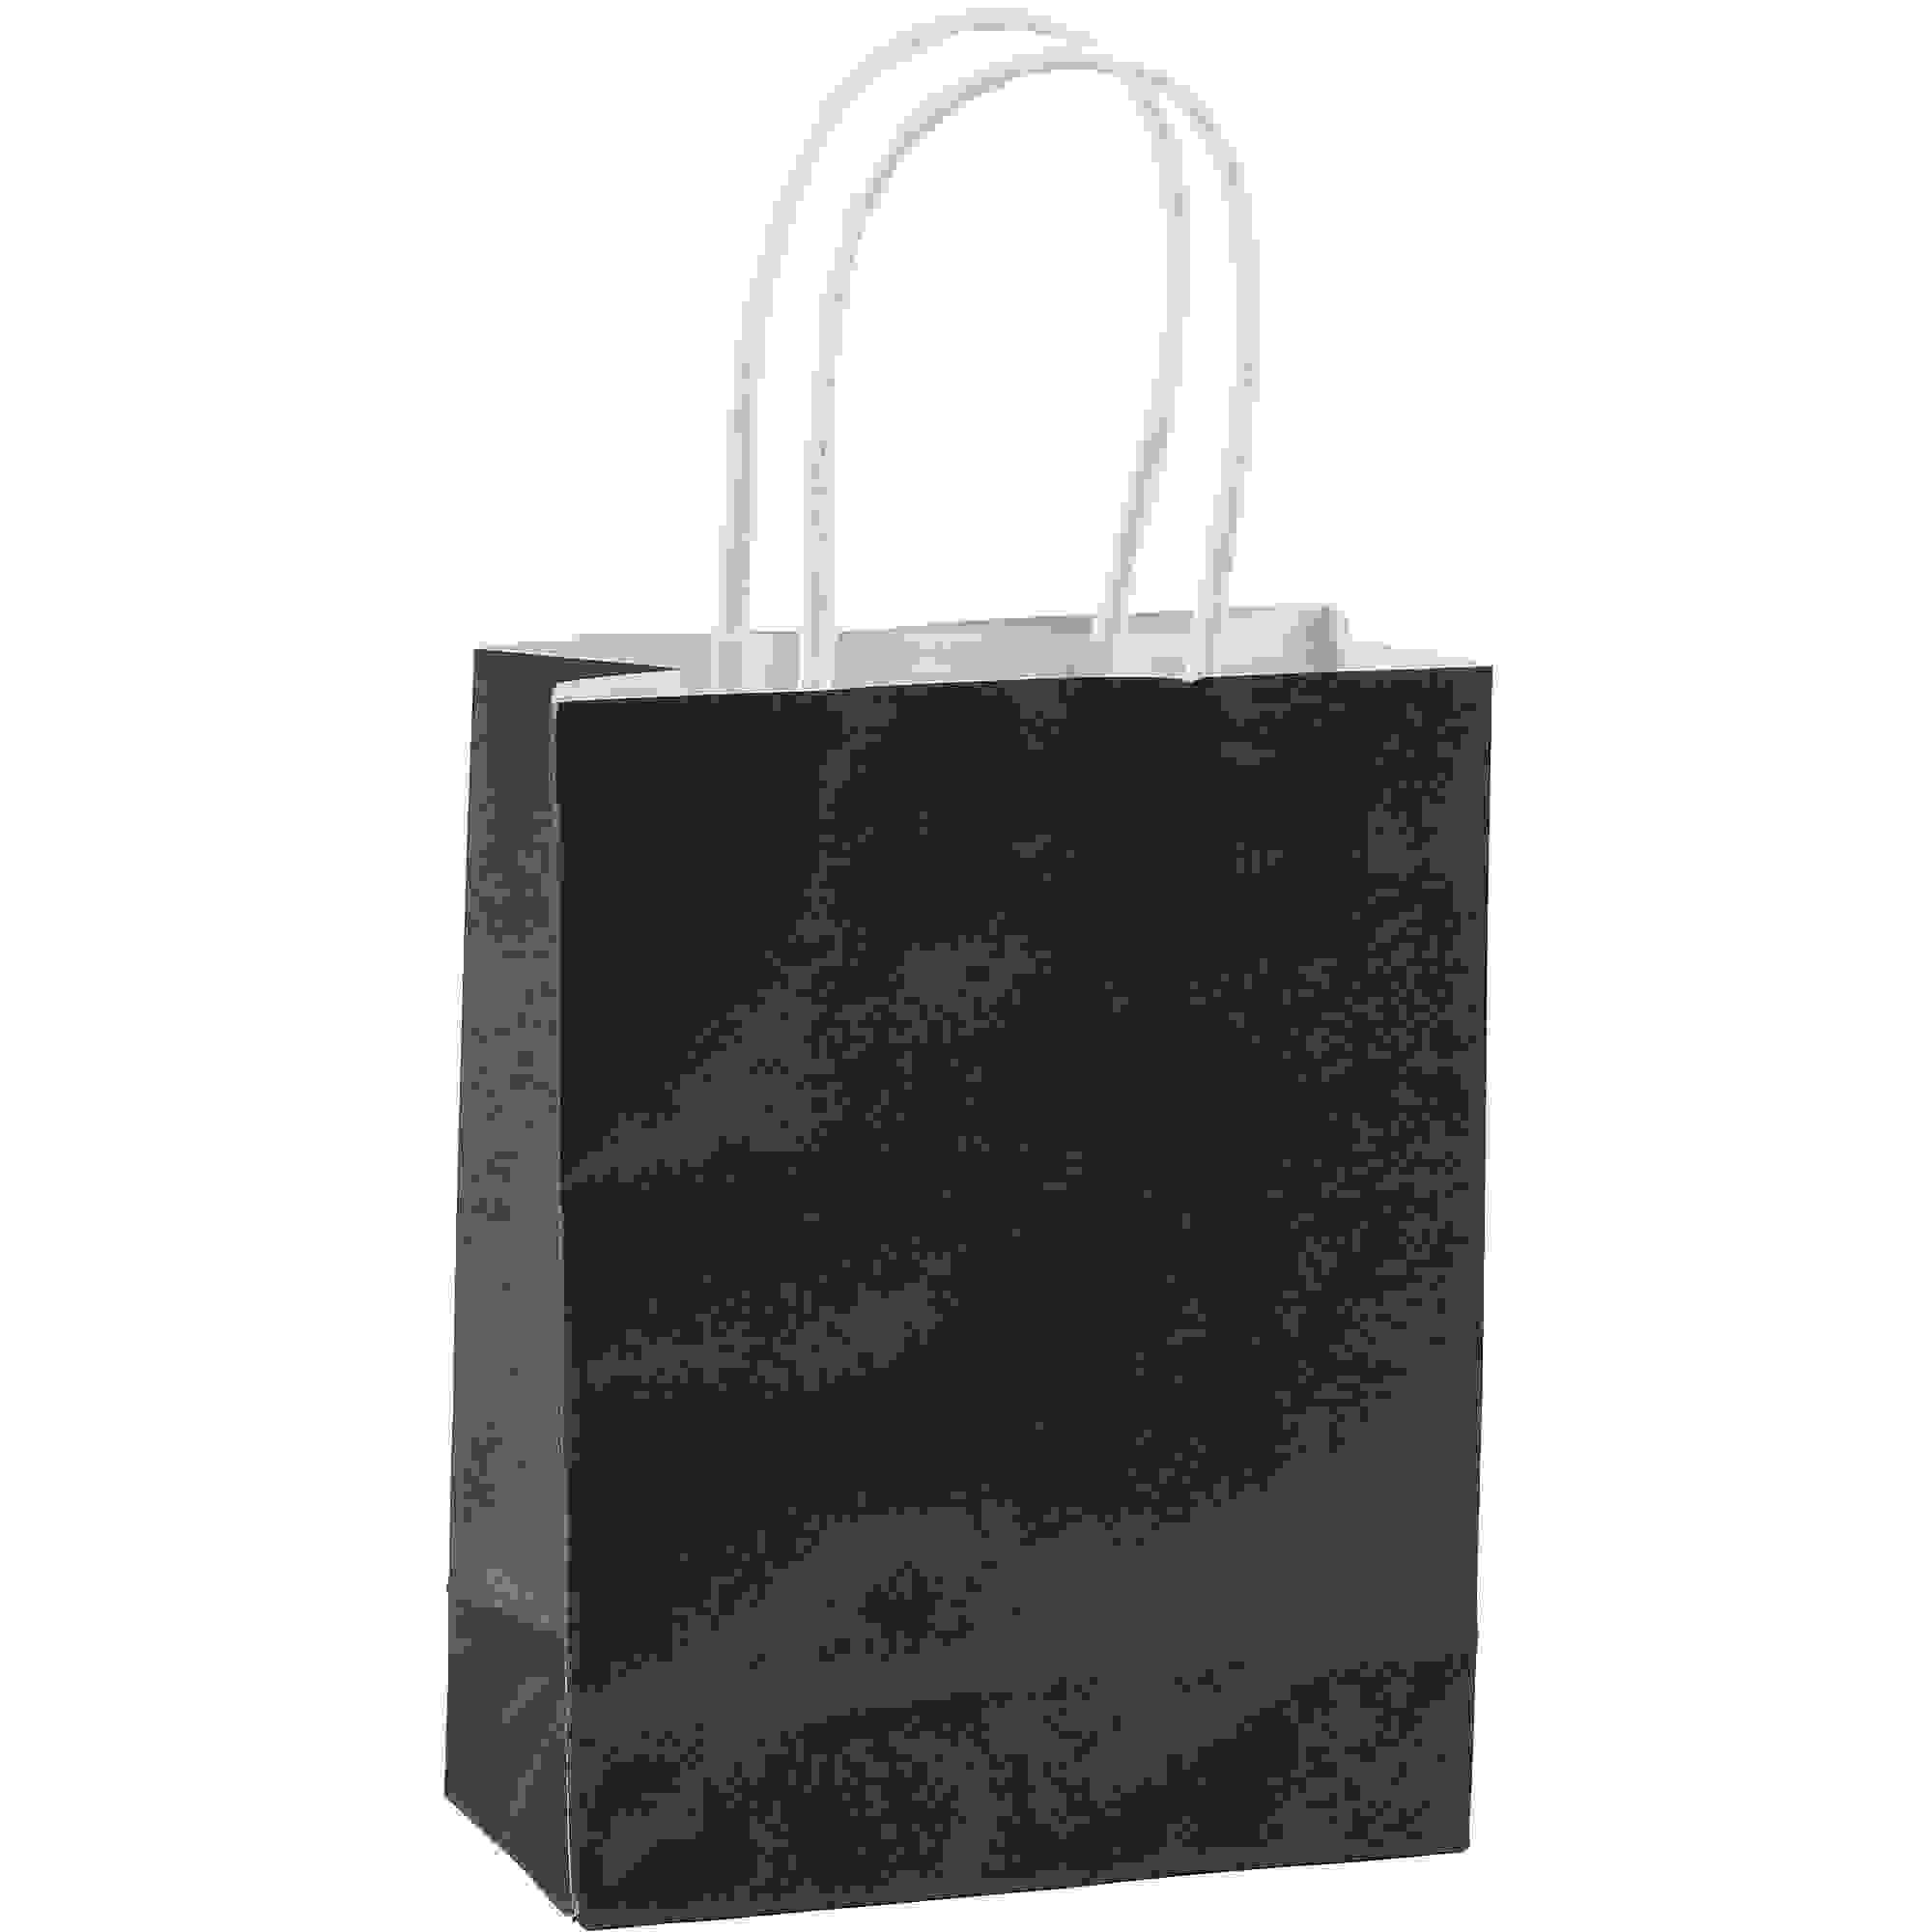 Amscan Small Paper Gift Bag Value Pack, Black, 10 count